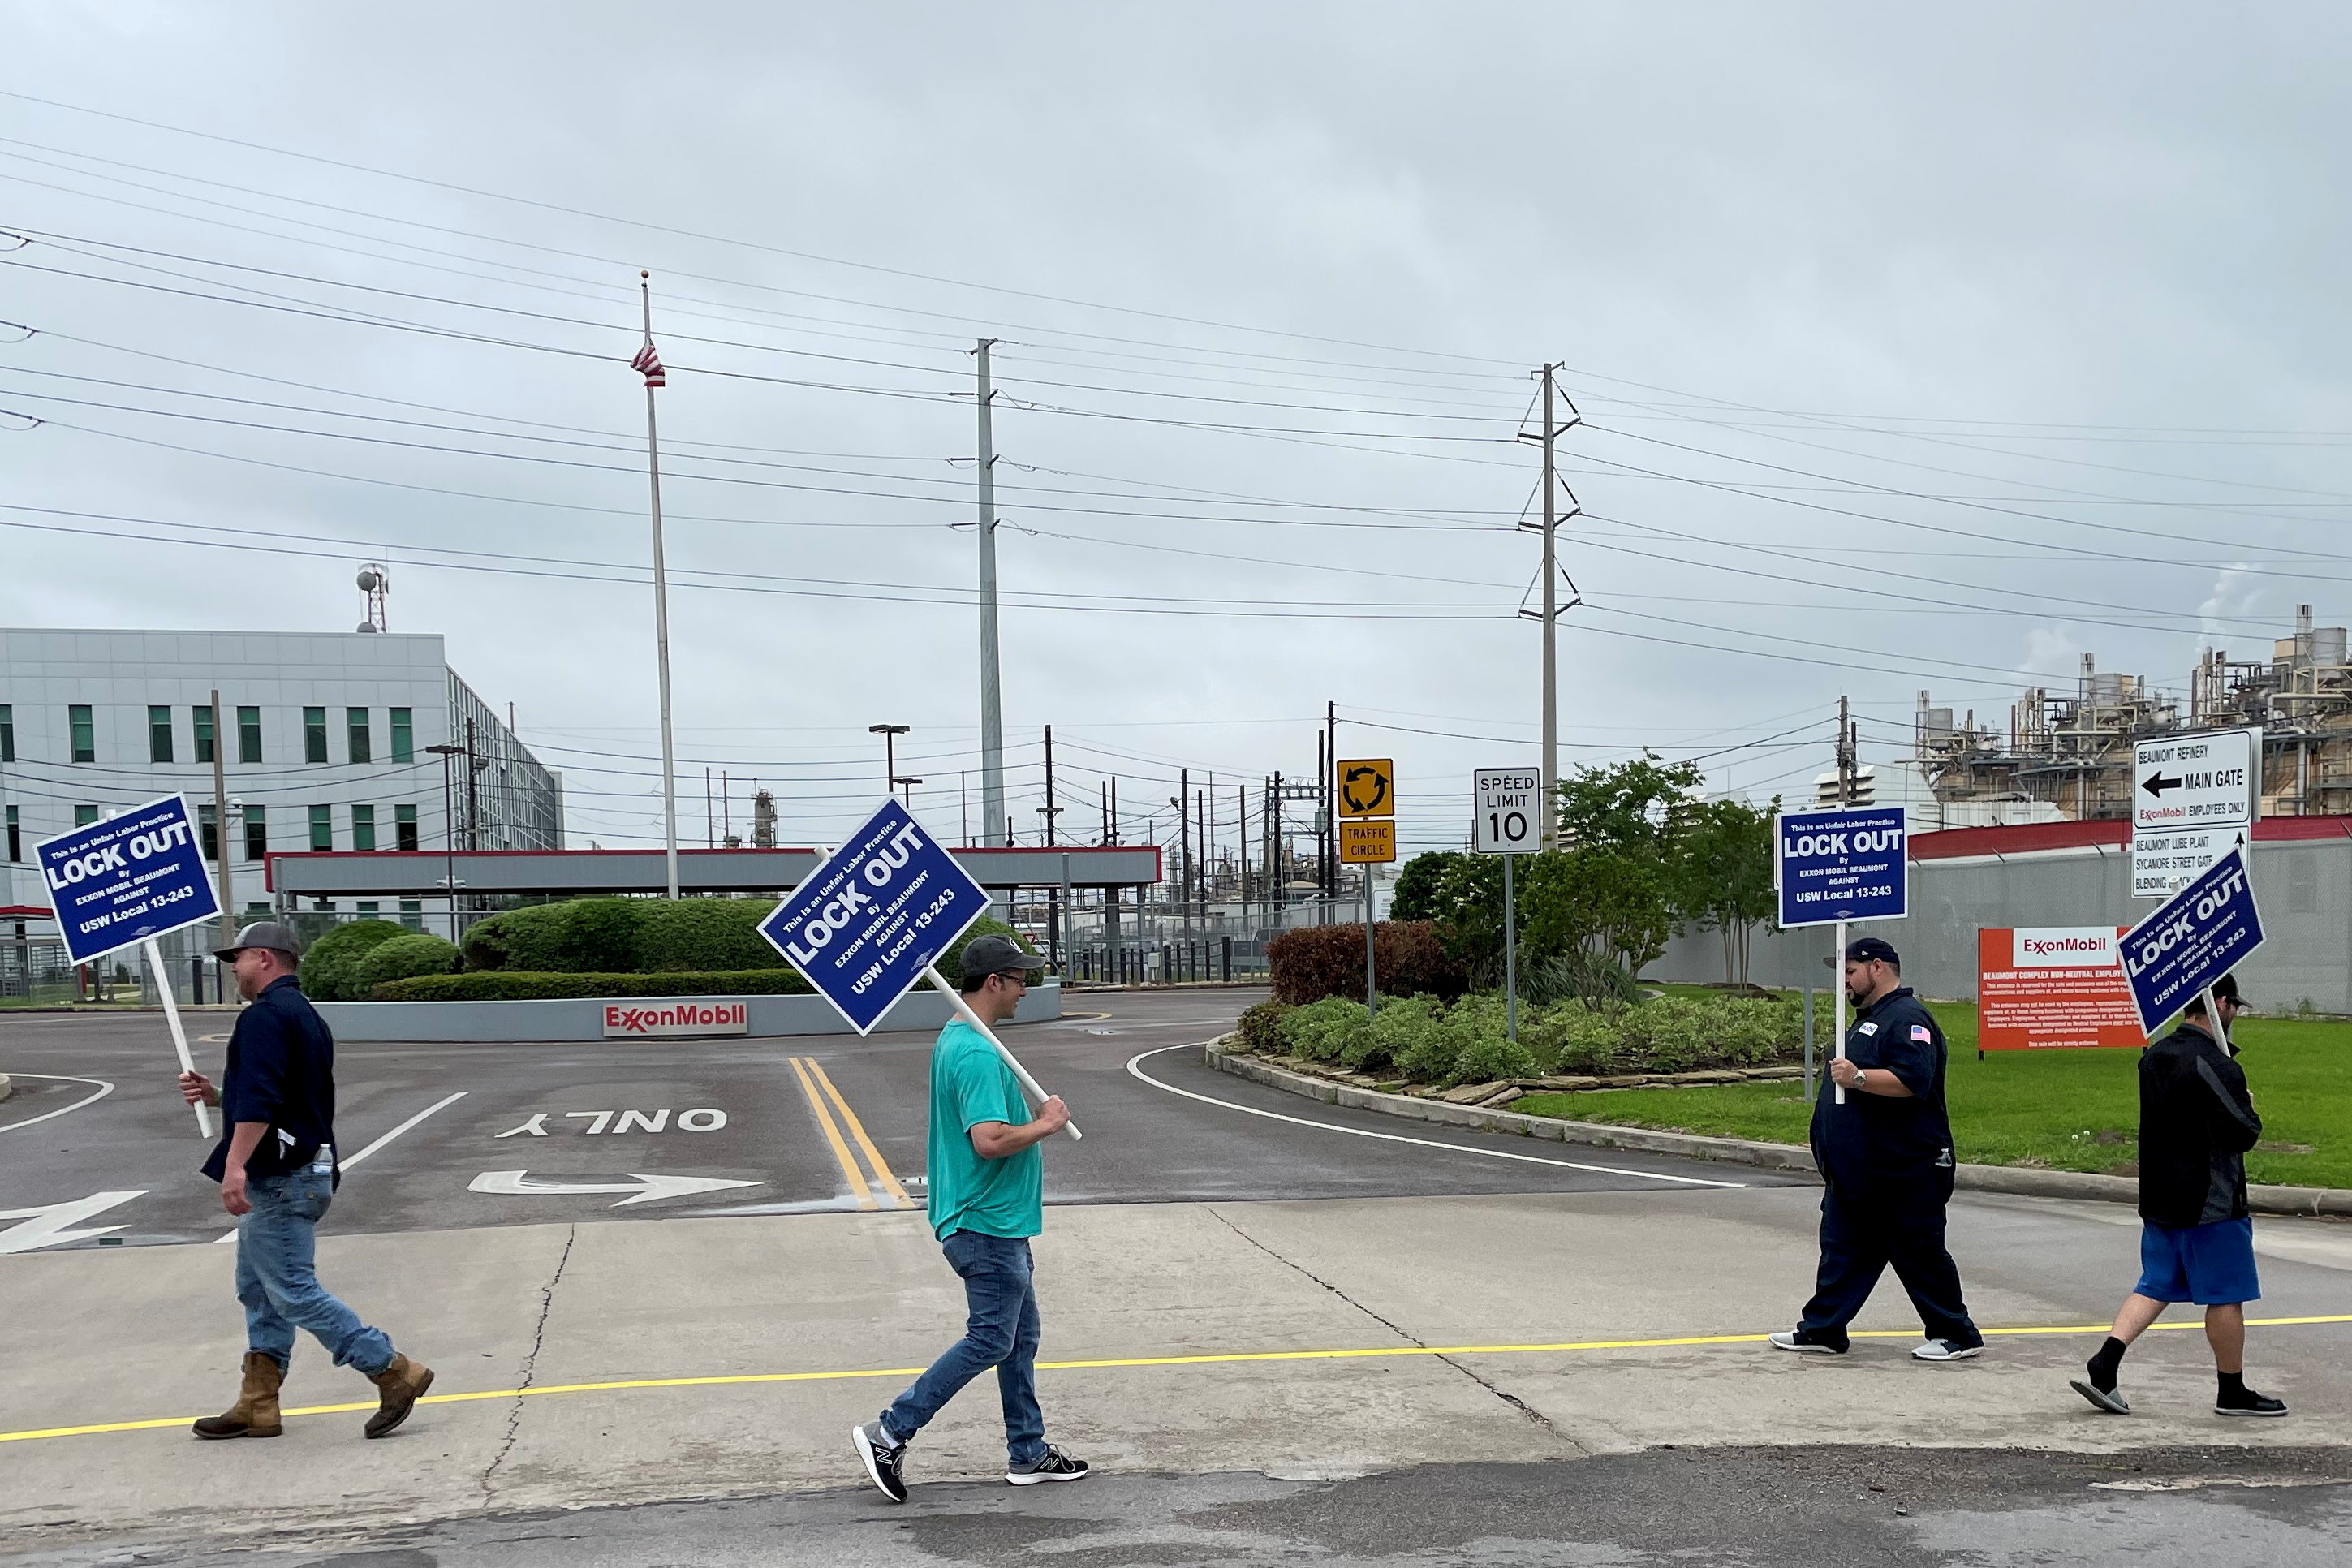 United Steelworkers (USW) union members picket outside Exxon Mobil's oil refinery amid a contract dispute in Beaumont, Texas, U.S., May 1, 2021. REUTERS/Erwin Seba